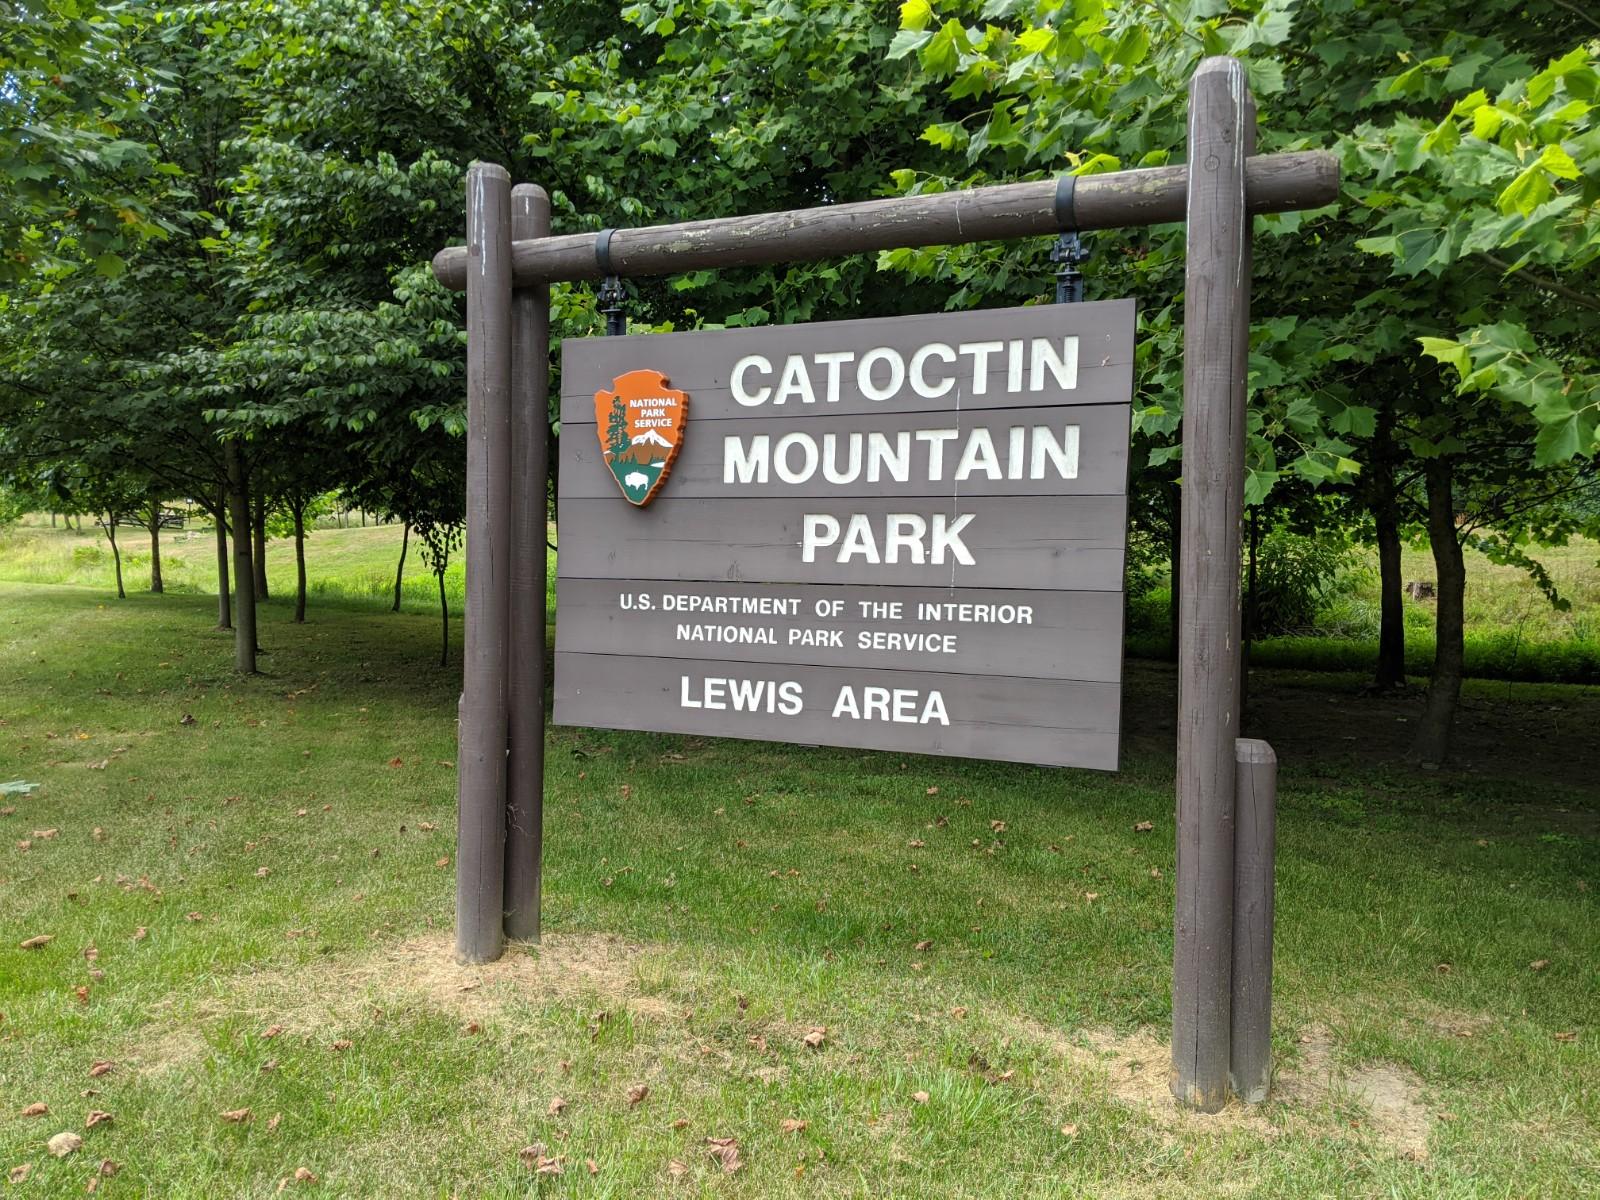 Sign reading Catoctin Mountain Park U.S. Department of the Interior National Park Service Lewis Area